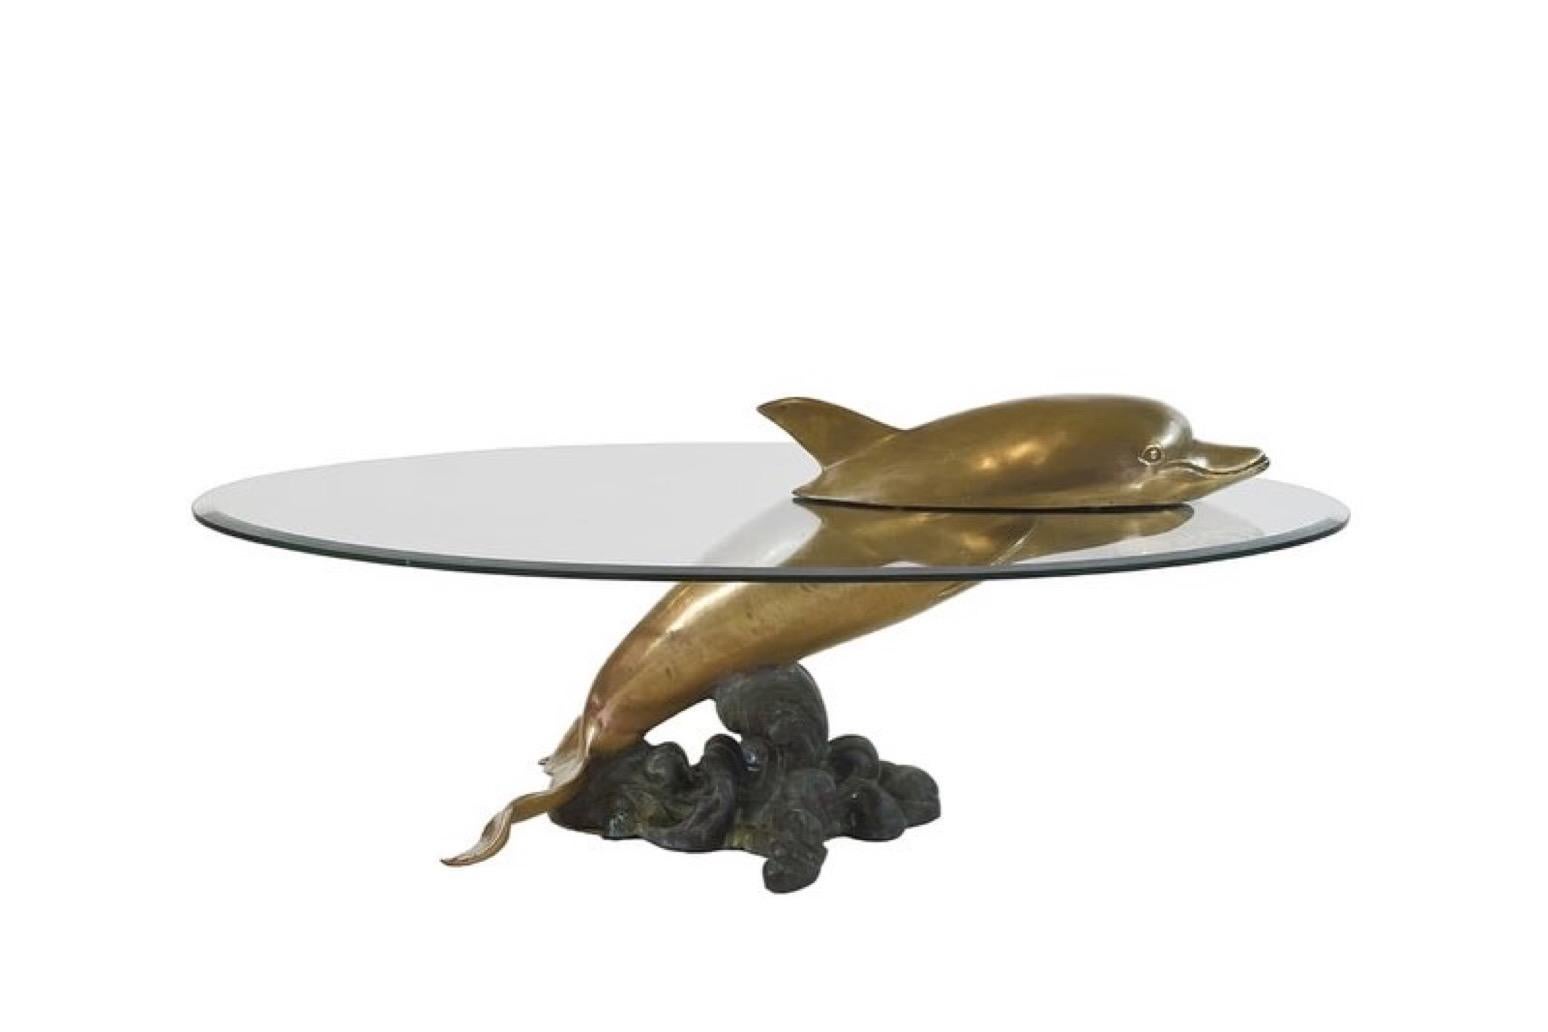 A truly eye catching, unusual Brass metal table, fashioned in the shape of a Dolphin on an elegant Brass ‘Ocean Wave’ base and with a Glass top. The Tabletop comes in matching facet Glass. The head of the Dolphin lies on the glass top and makes it